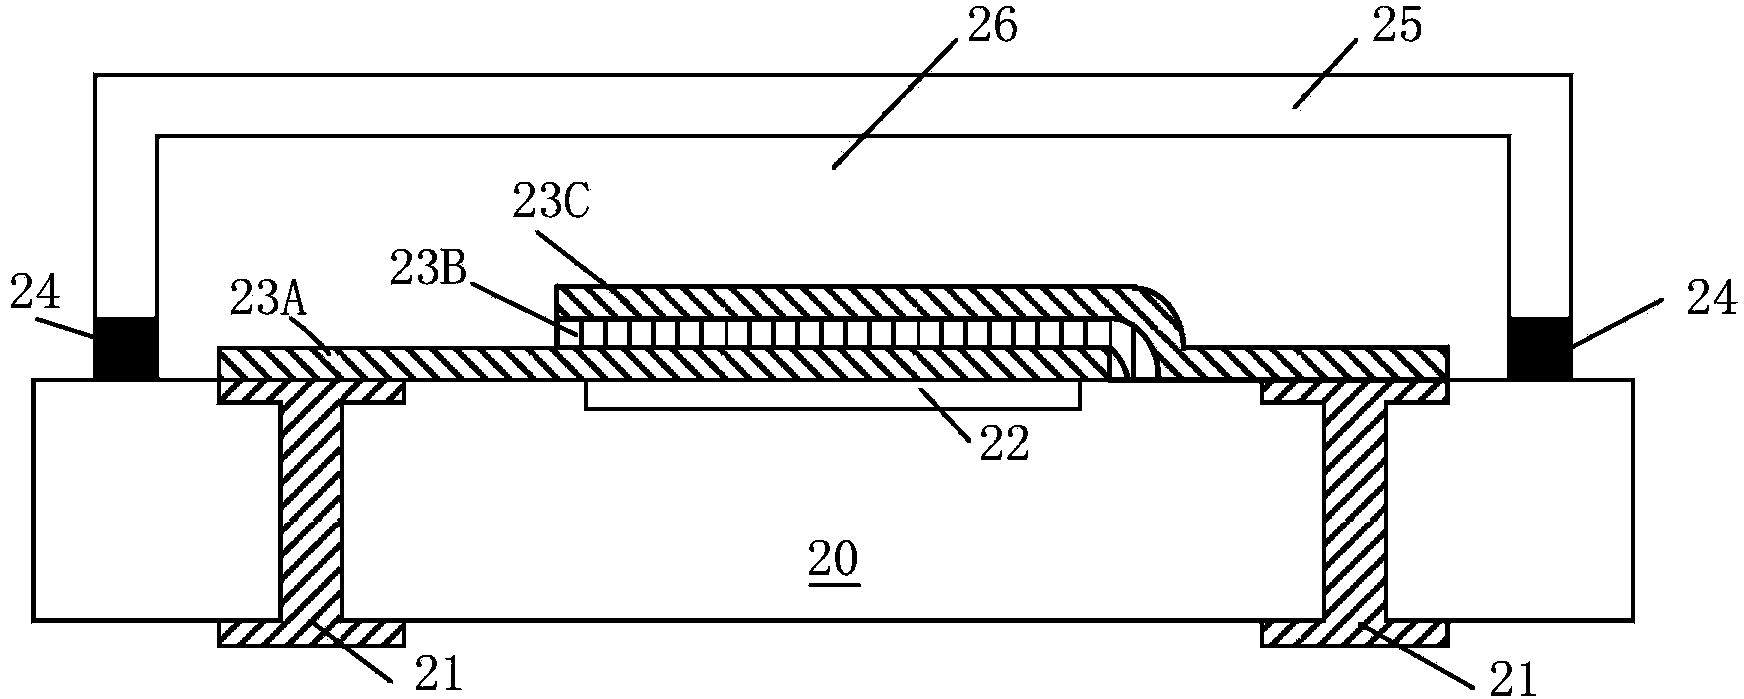 Semiconductor device packing structure and semiconductor device packing technological process